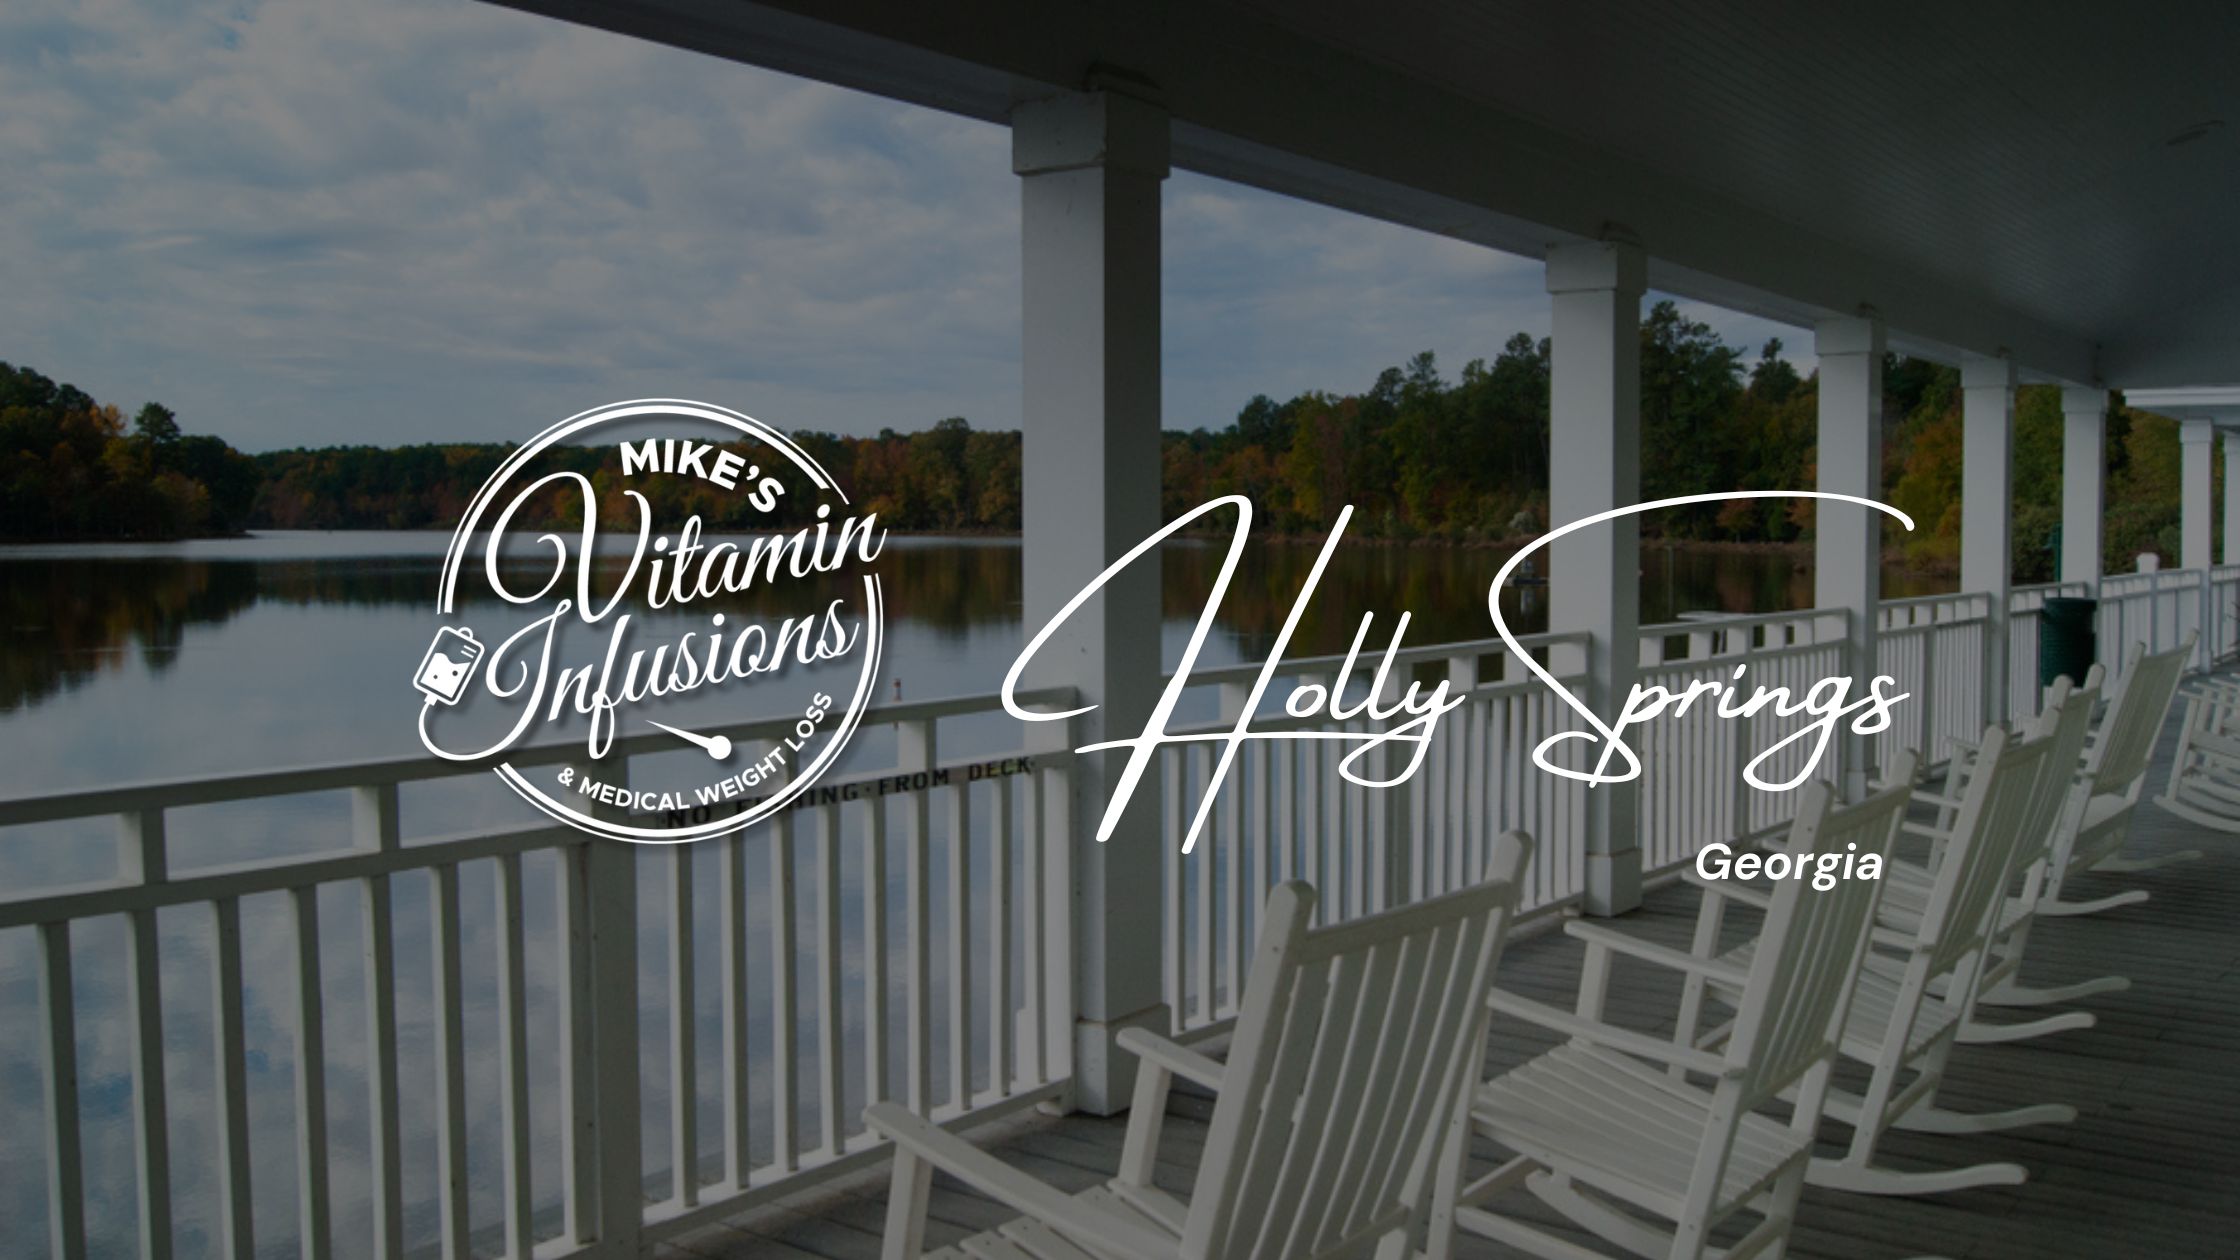 Image of a balcony overlooking a lake in Holly Springs Georgia with the mike's vitamin infusions logo